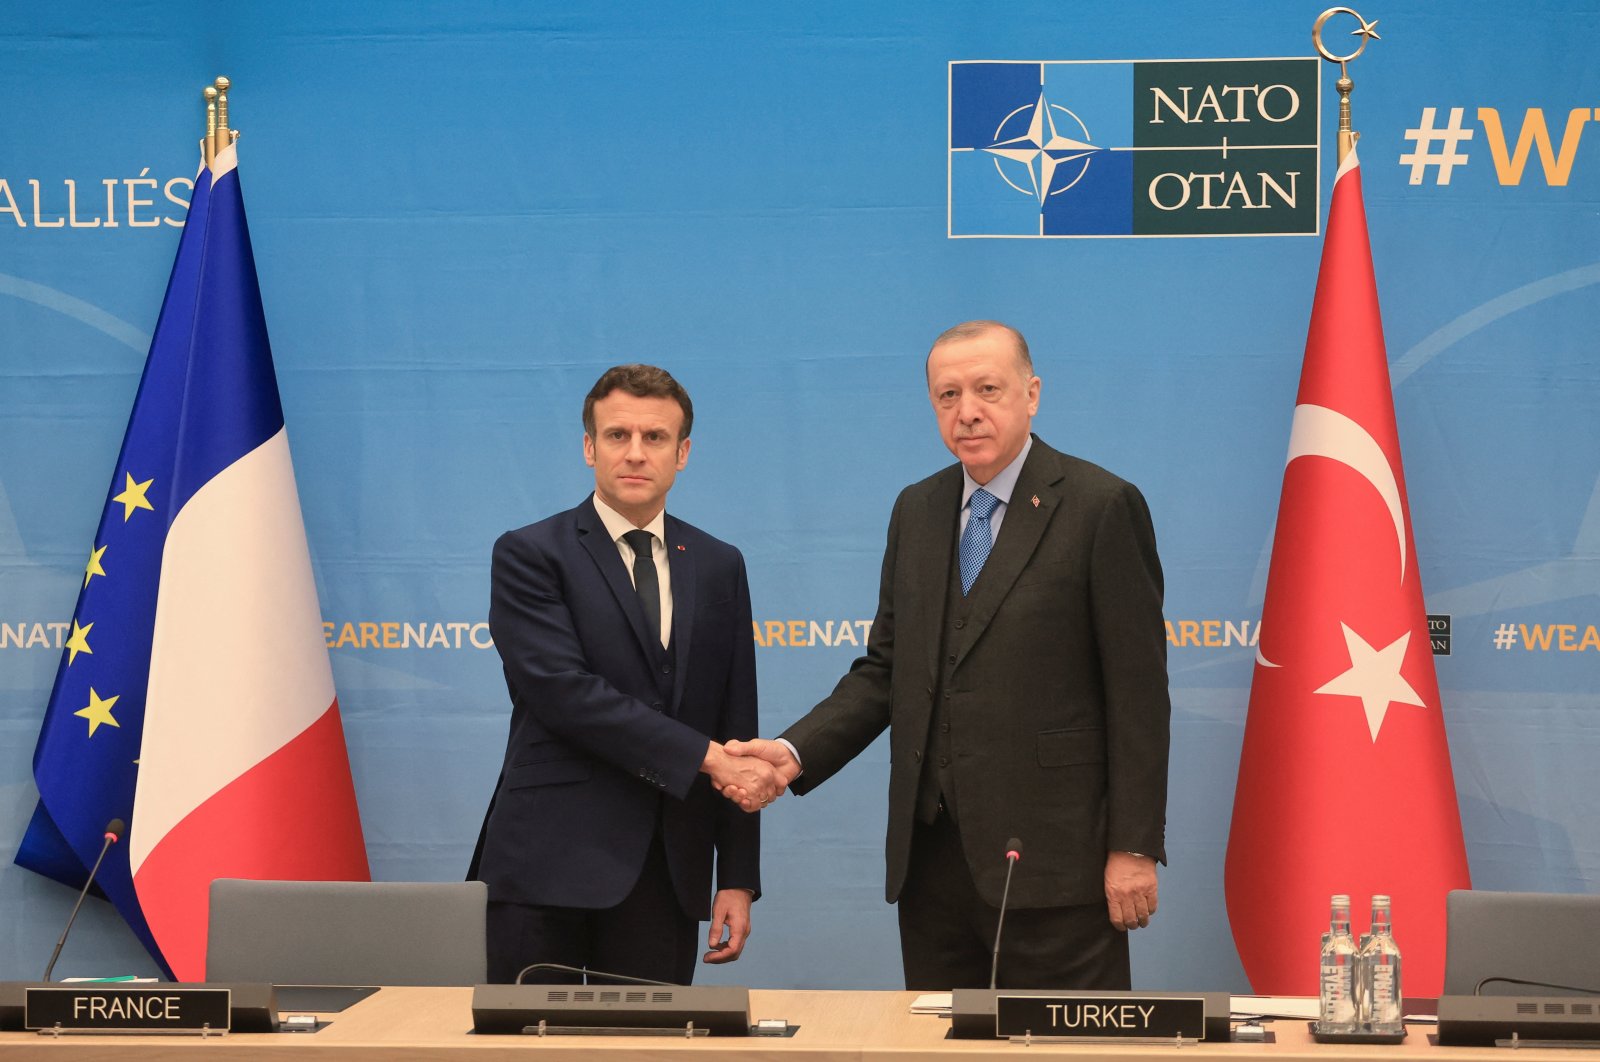 President Recep Tayyip Erdoğan and French President Emmanuel Macron shake hands as they attend a bilateral meeting ahead of a NATO summit to discuss Russia&#039;s invasion of Ukraine, at the alliance&#039;s headquarters in Brussels, Belgium, March 24, 2022. (Reuters Photo)